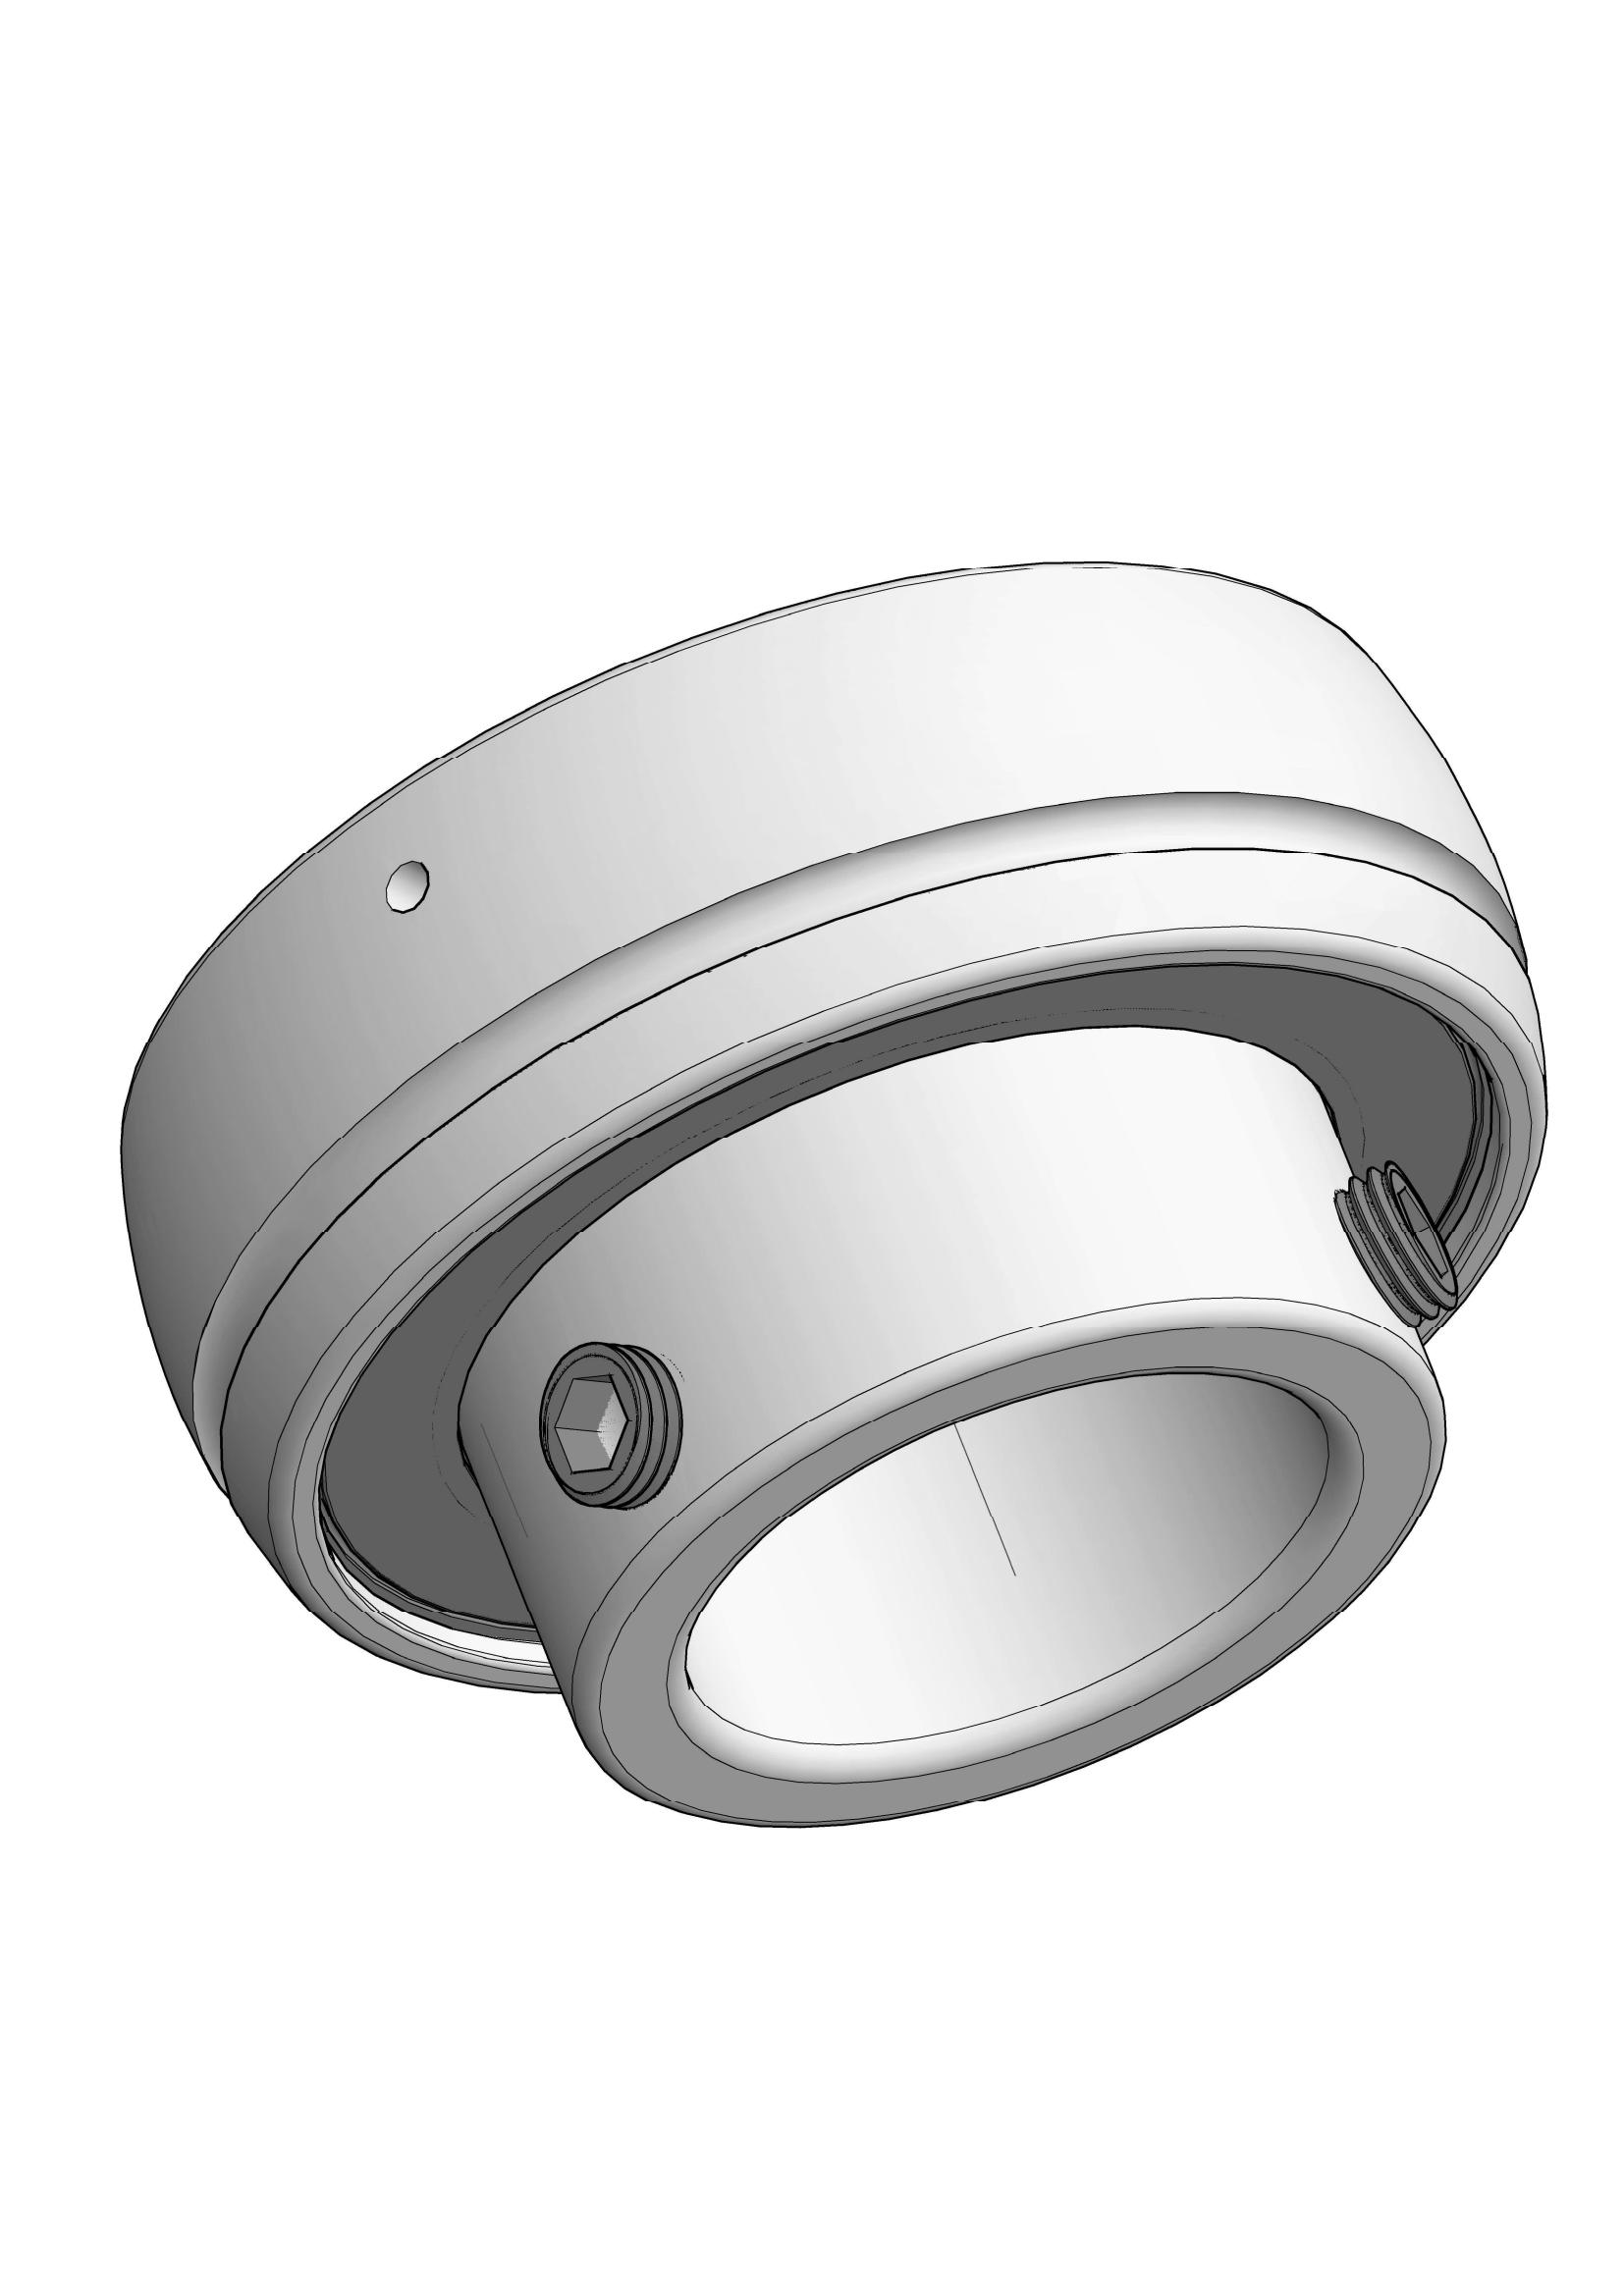 SB207-20 insert ball bearings with Eccentric Collar Lock with 1-1/4 inch Bore